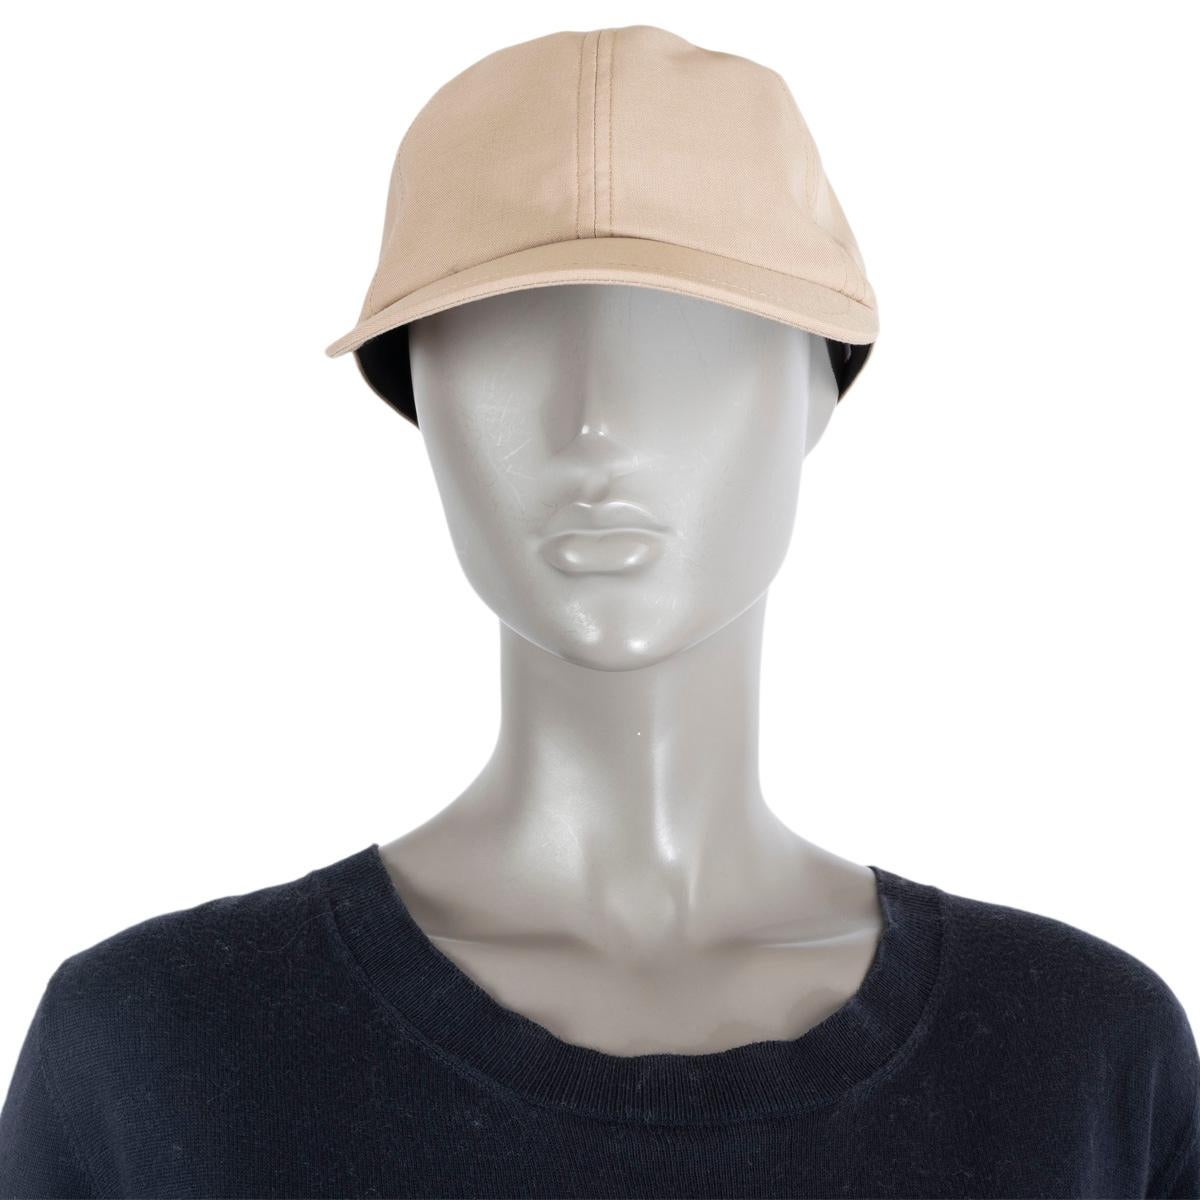 100% authentic Sacai drawstring baseball cap in beige wool (100%).  Has been worn and is in virtually new condition.

Measurements
Tag Size	2
Inside Circumference	56cm (21.8in)

All our listings include only the listed item unless otherwise